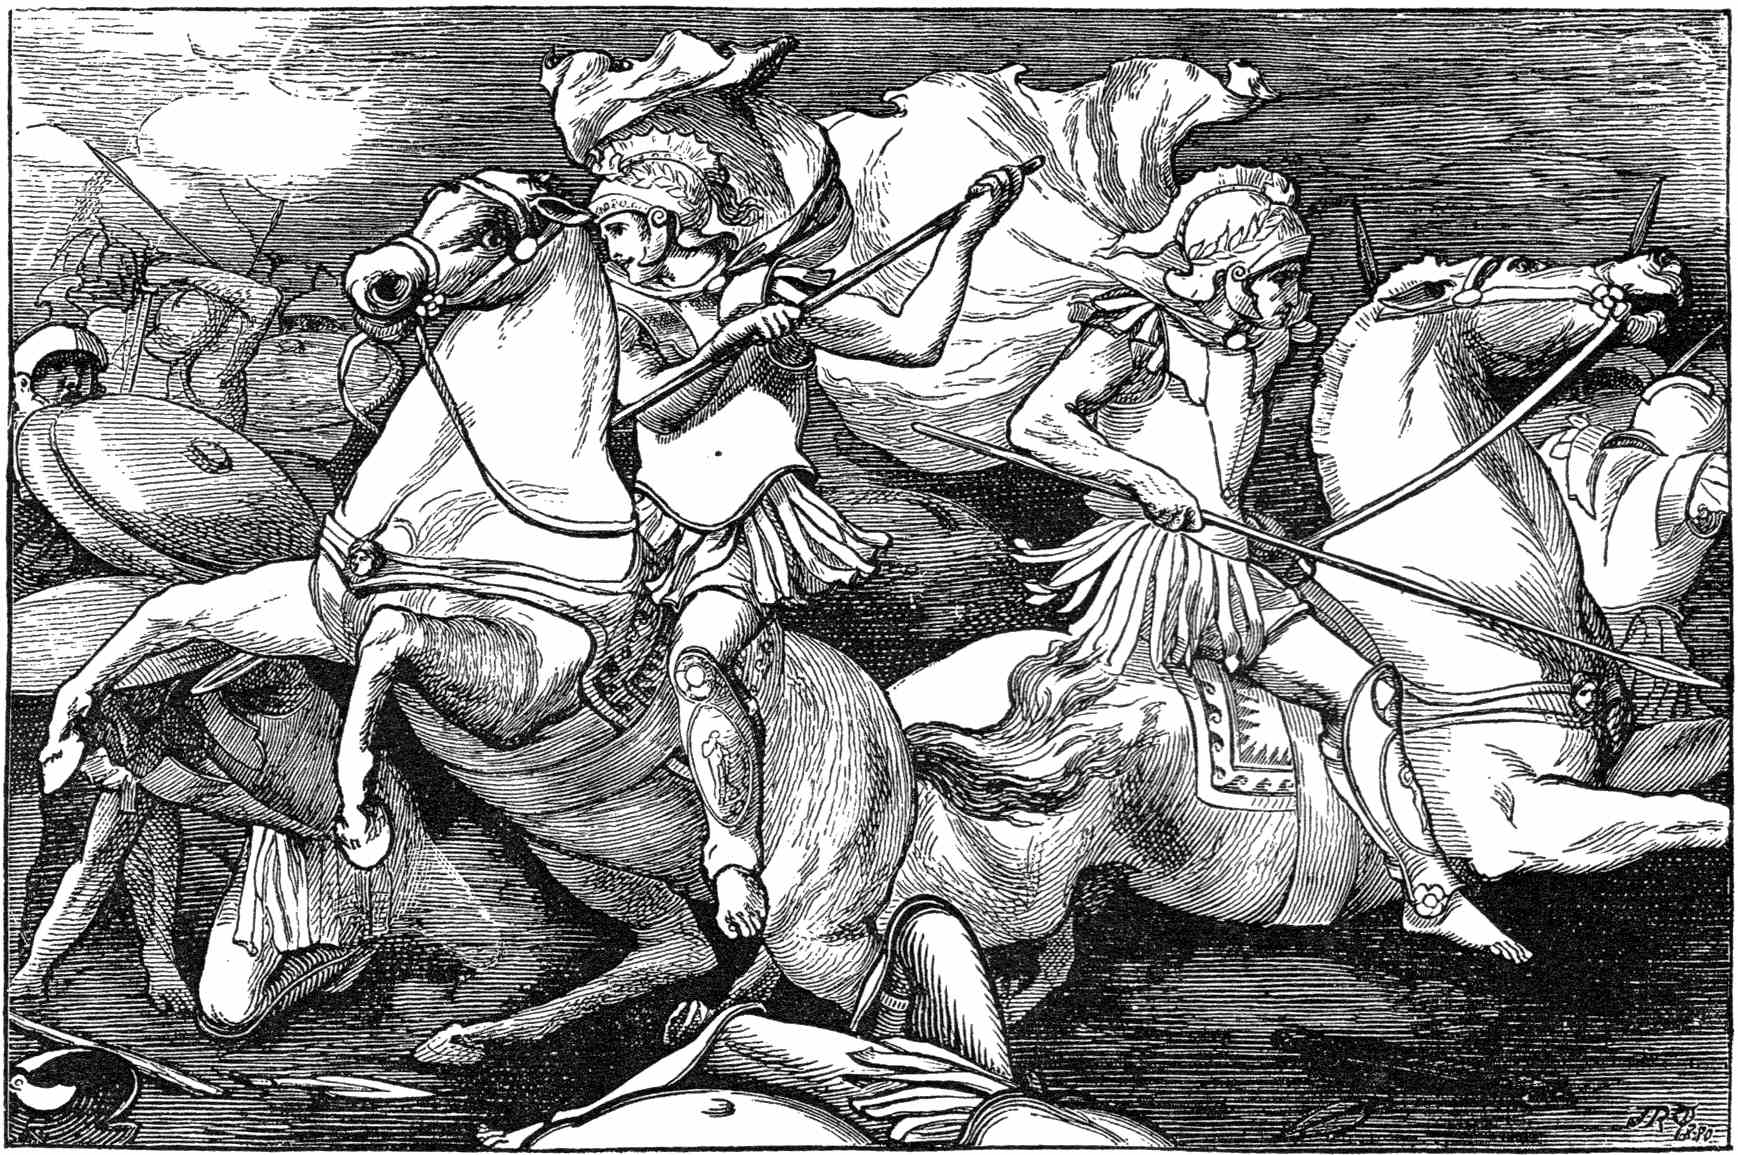 Showing Castor and Pollux fighting at the Battle of Lake Regillus. Woodcut from Engraving by John Reinhard Weguelin (1849 to 1927). Drawing is signed JRW1880 in bottom right corner.